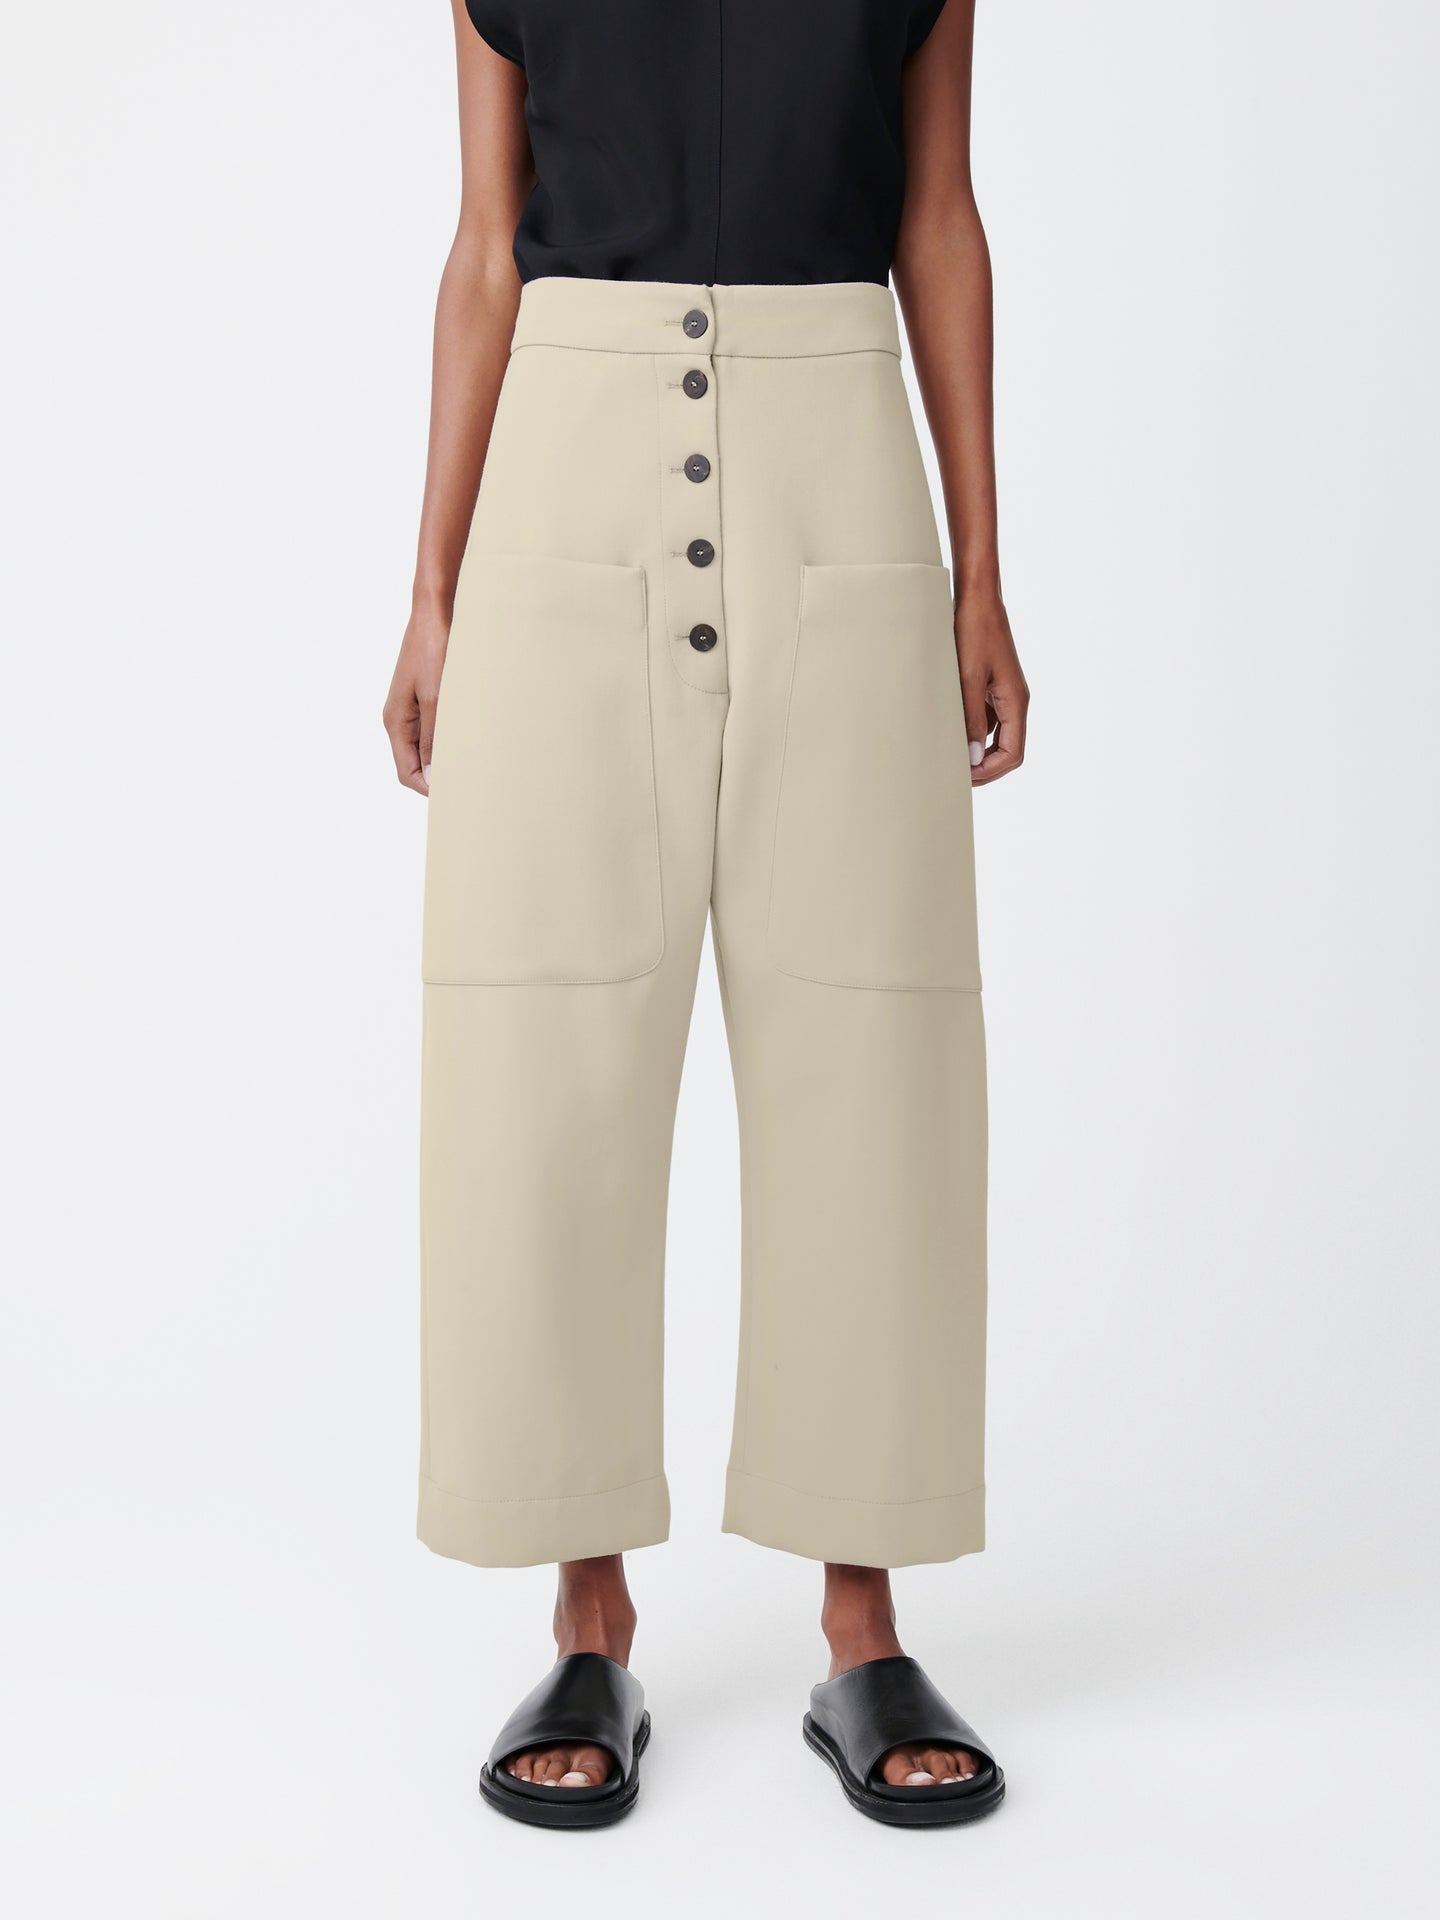 TAUPO PANT IN LIGHT BAMBOO